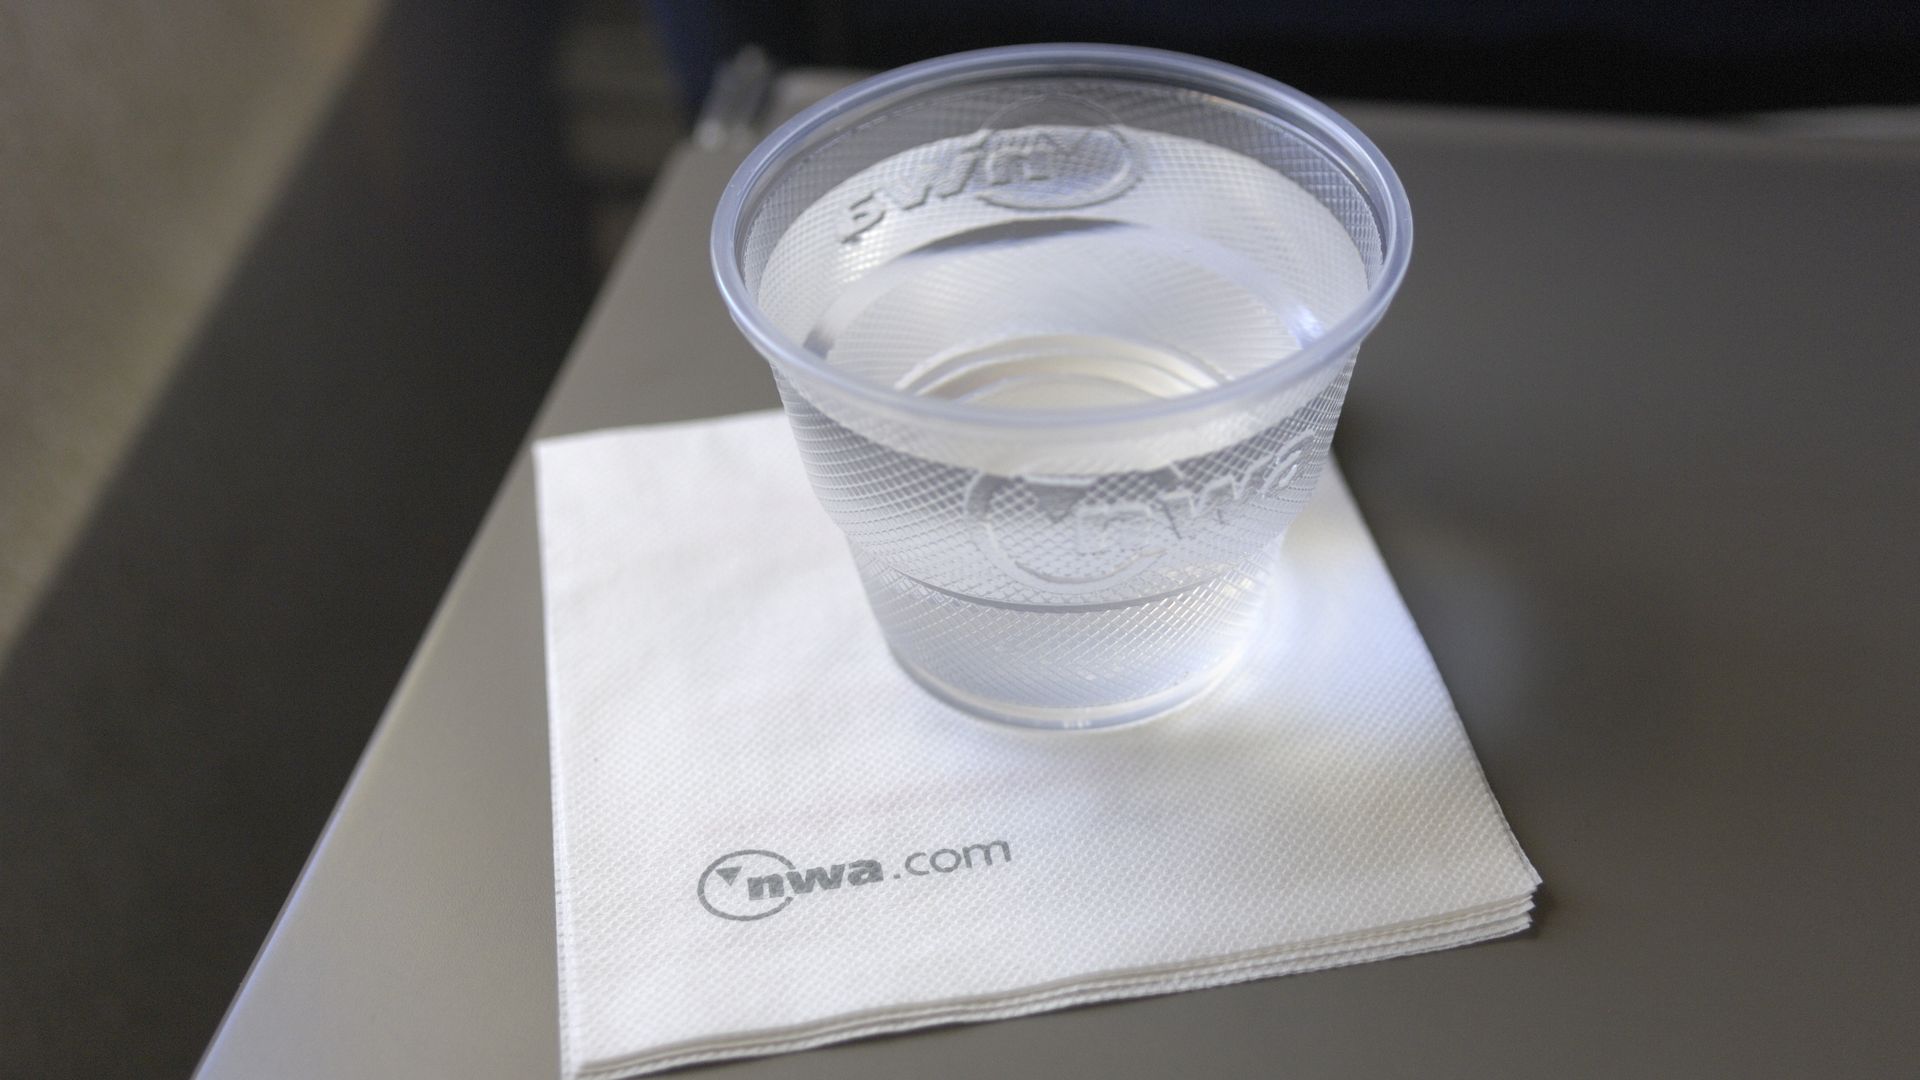 A cup of water on an airplane